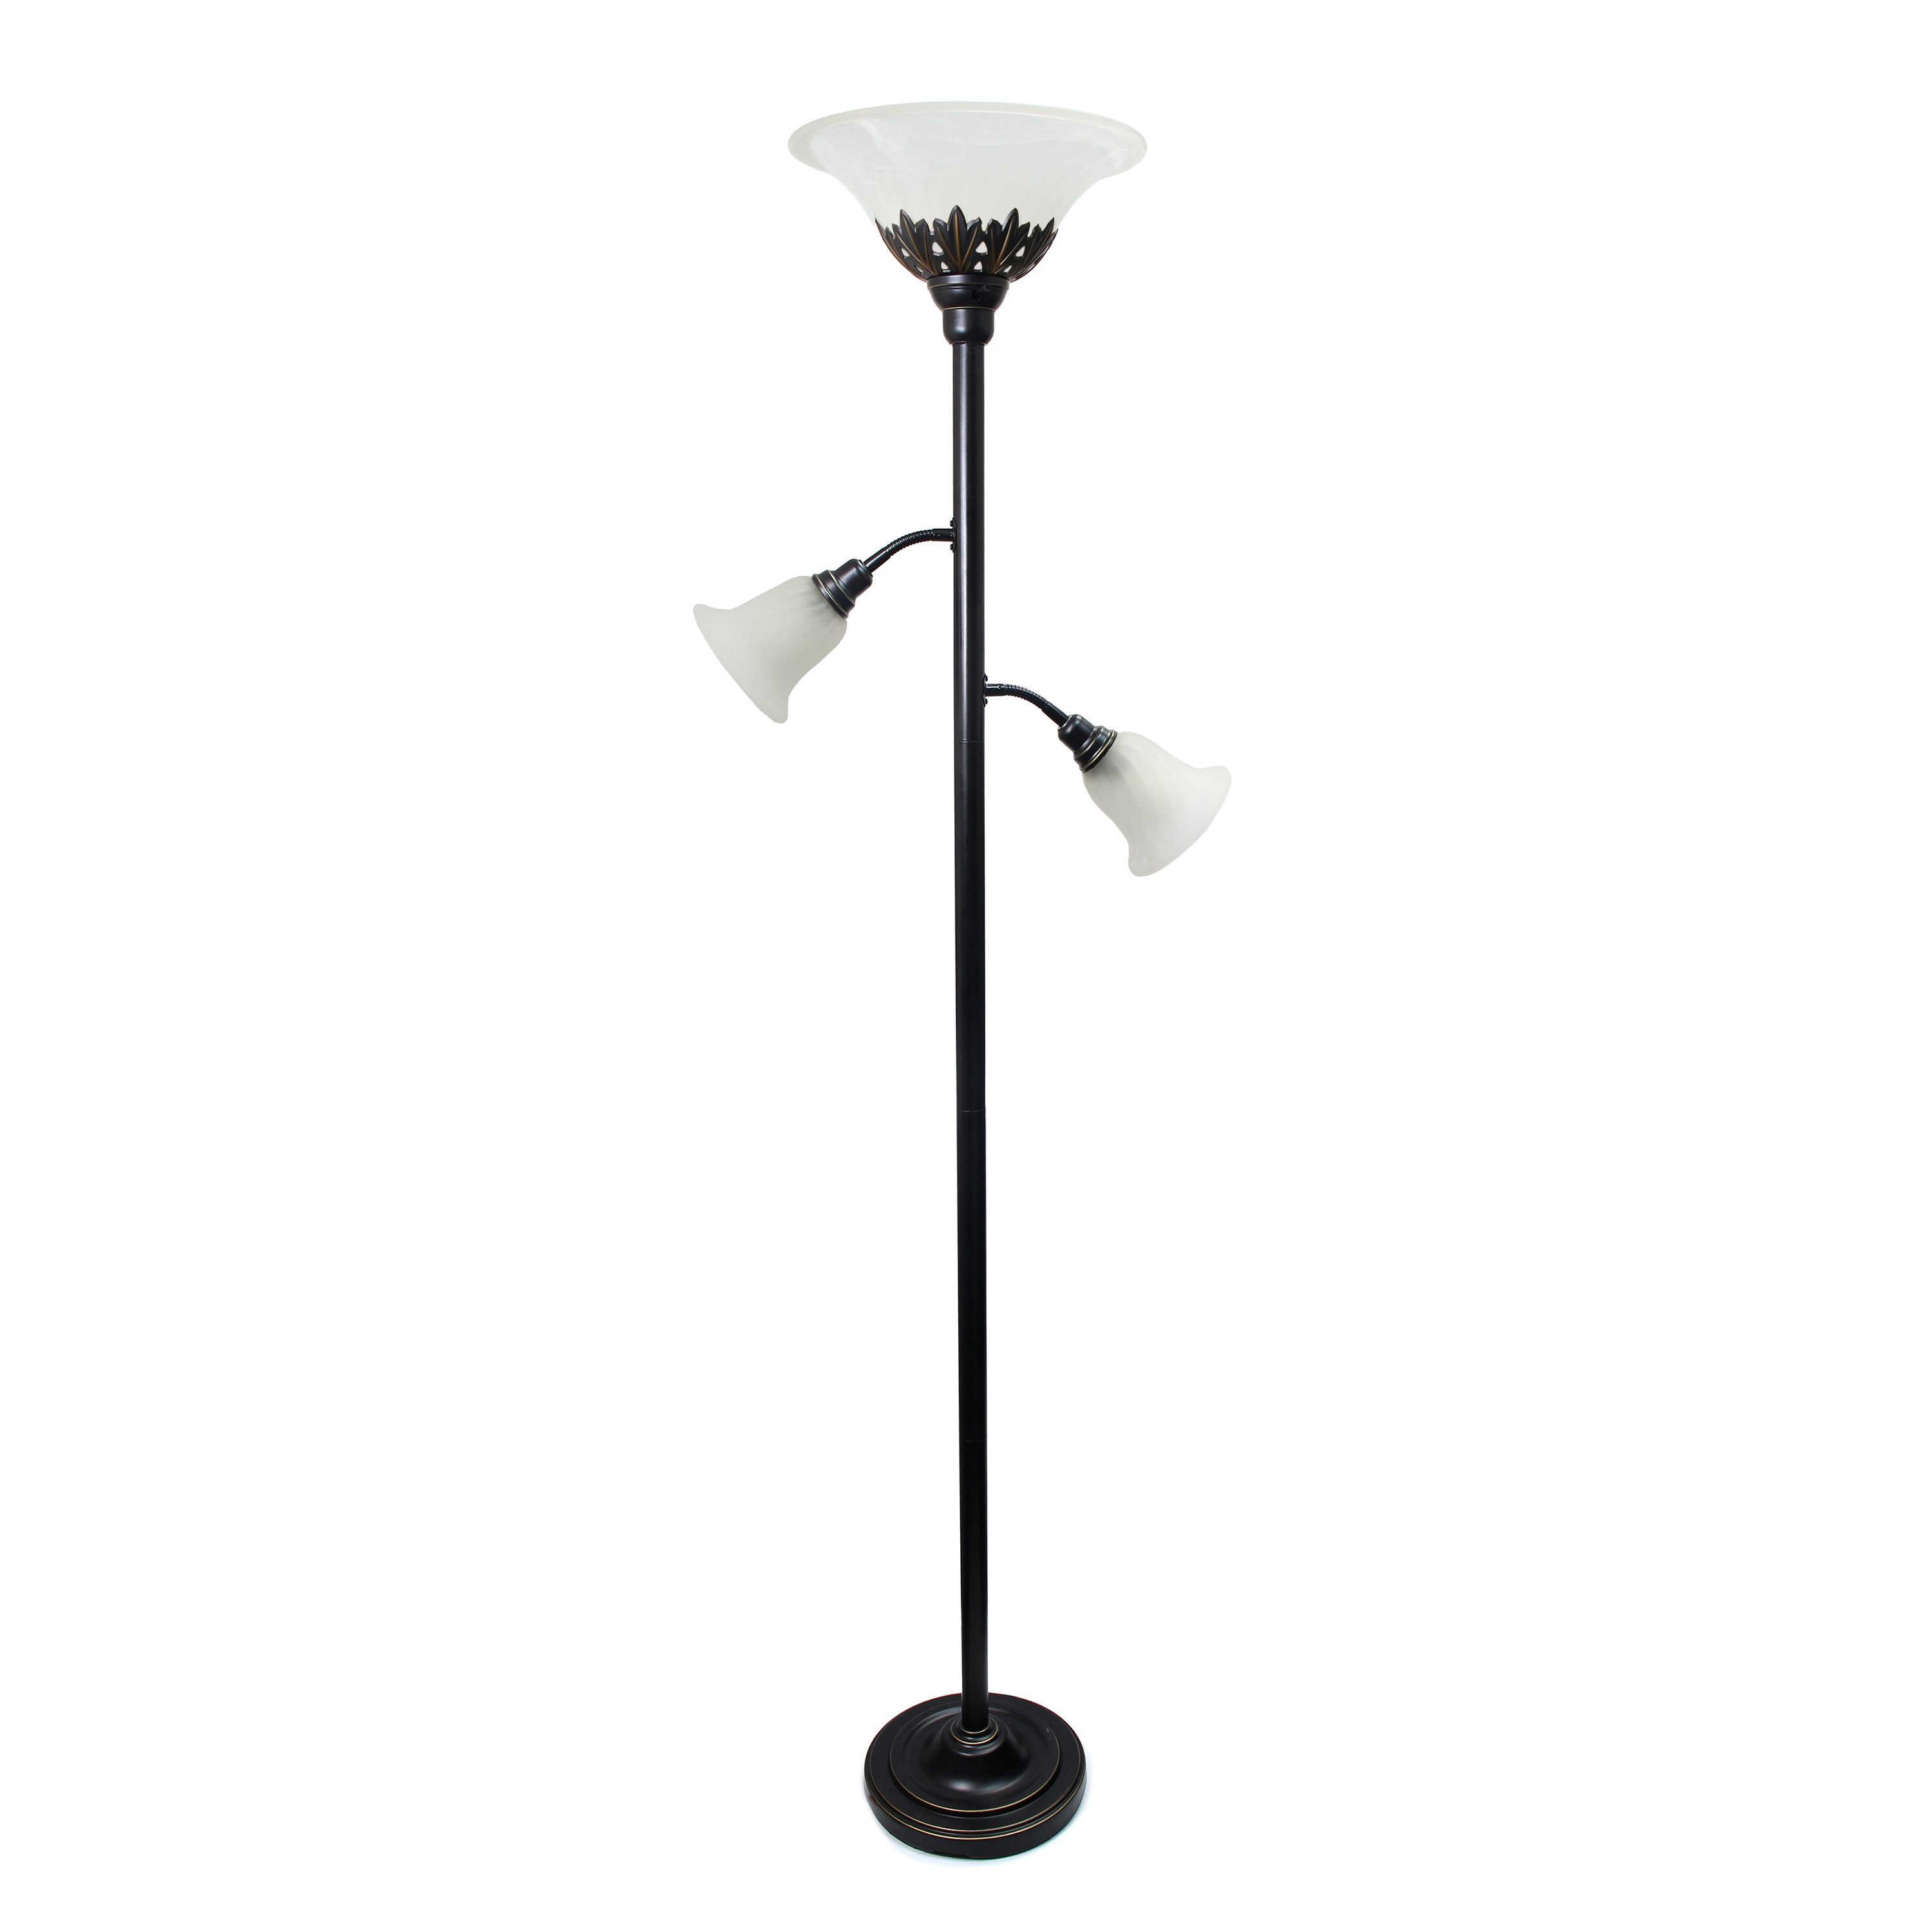 Lalia Home Torchiere Floor Lamp with 2 Reading Lights and Scalloped Glass Shades, Restoration Bronze and White